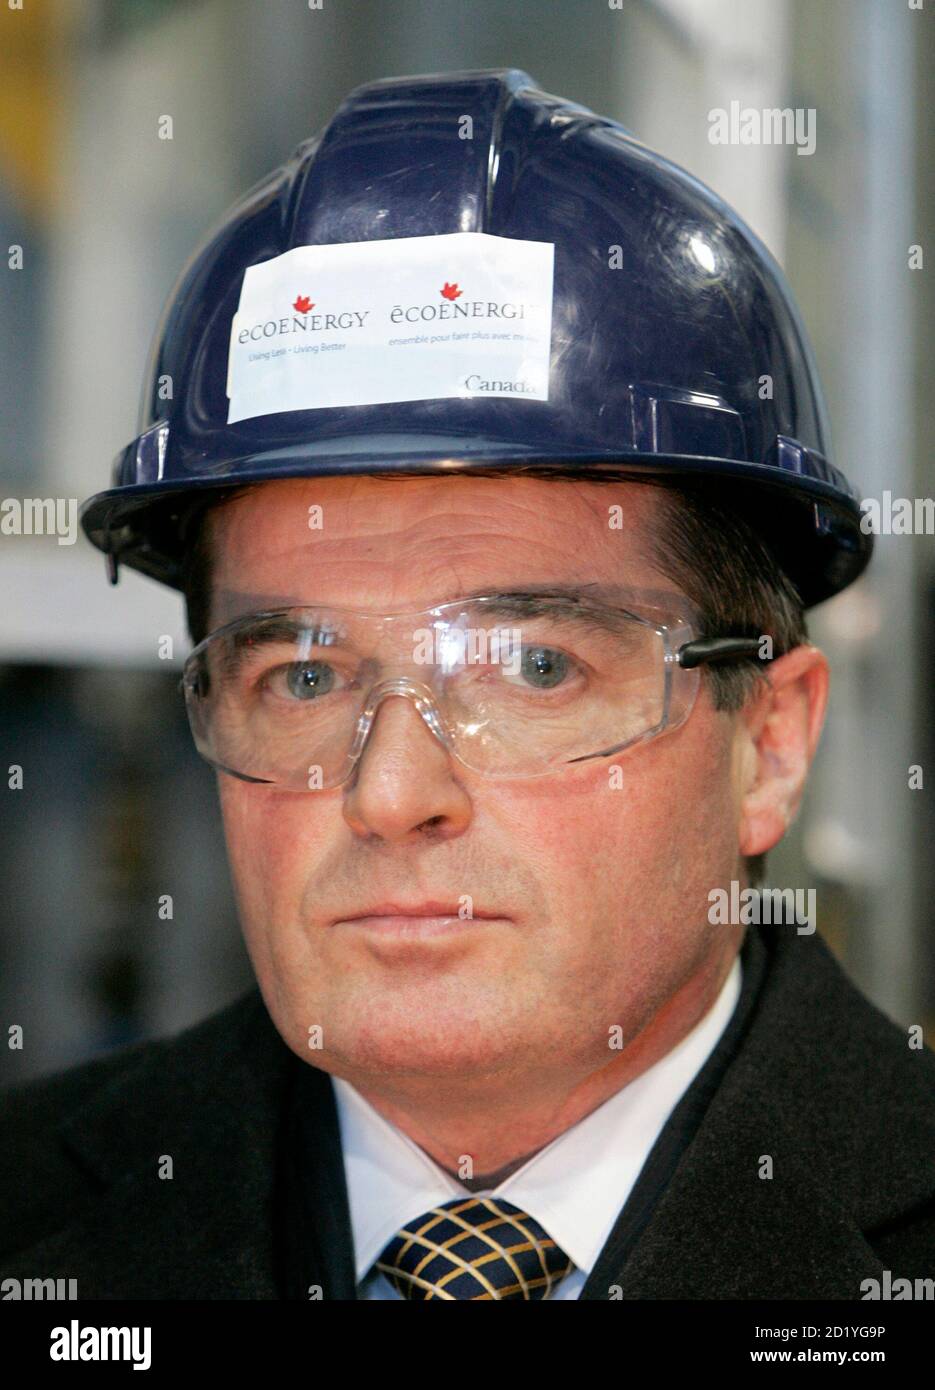 Canada's Natural Resources Minister Gary Lunn, wearing a hard hat and safety glasses, tours the Natural Resources Canada CANMET Energy Technology Centre in Ottawa January 17, 2007. Canada's minority Conservative government announced it was investing C$230 million ($196 million) in clean energy technology over the next four years.        REUTERS/Chris Wattie   (CANADA) Stock Photo